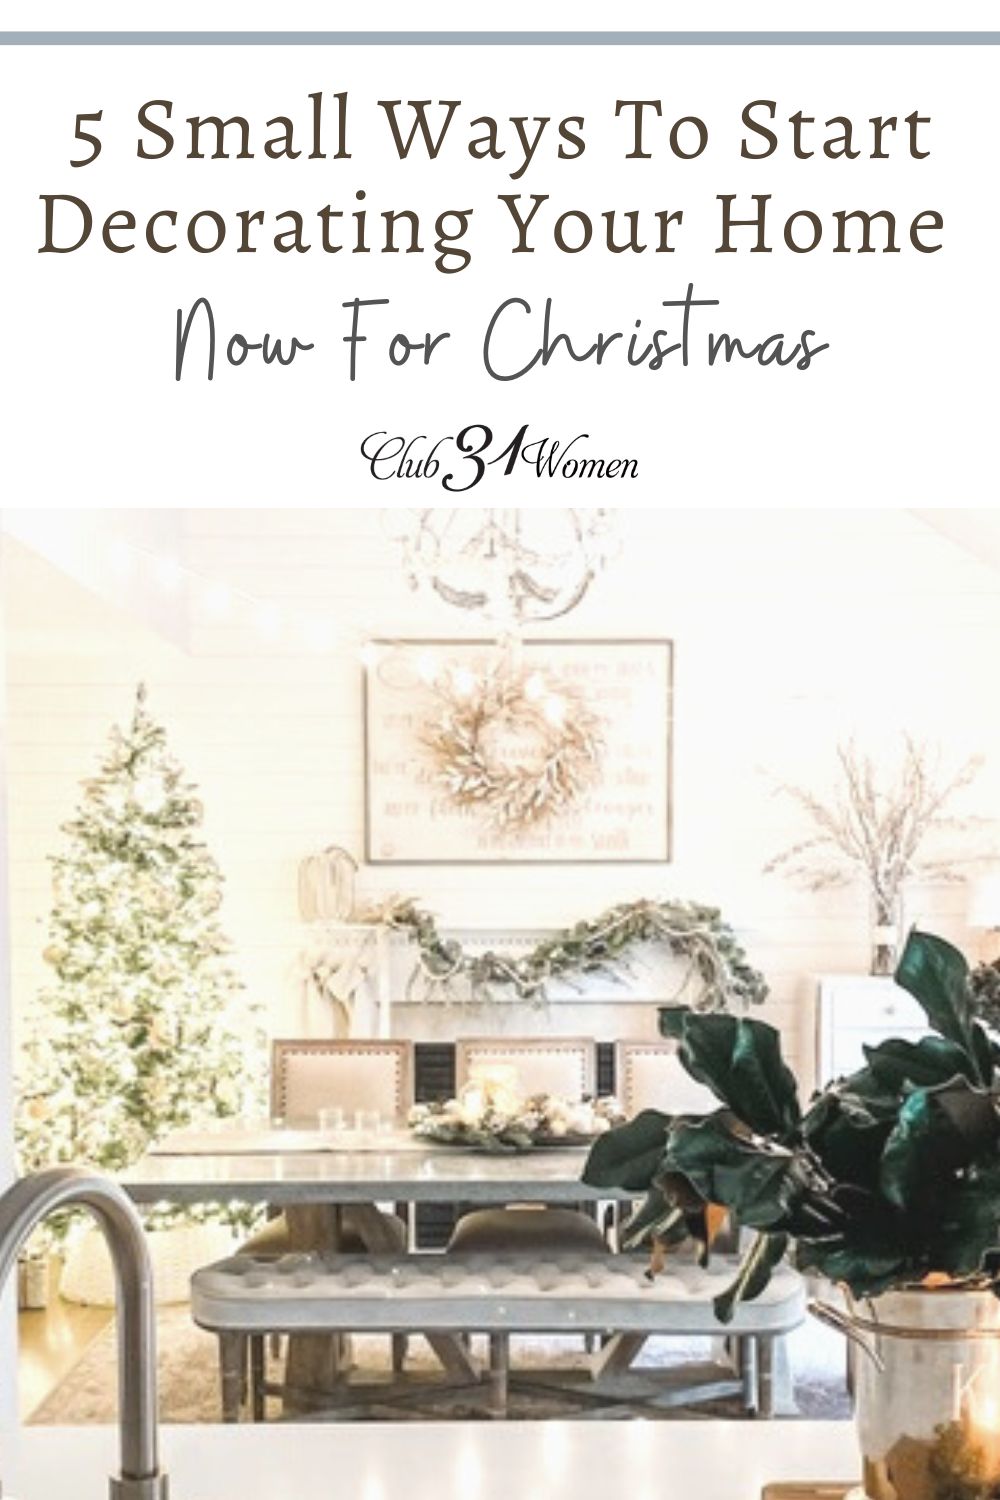 Are you in need of some simple tips to help you find inspiration for decorating for Christmas? Keep your home cozy with these small steps. via @Club31Women